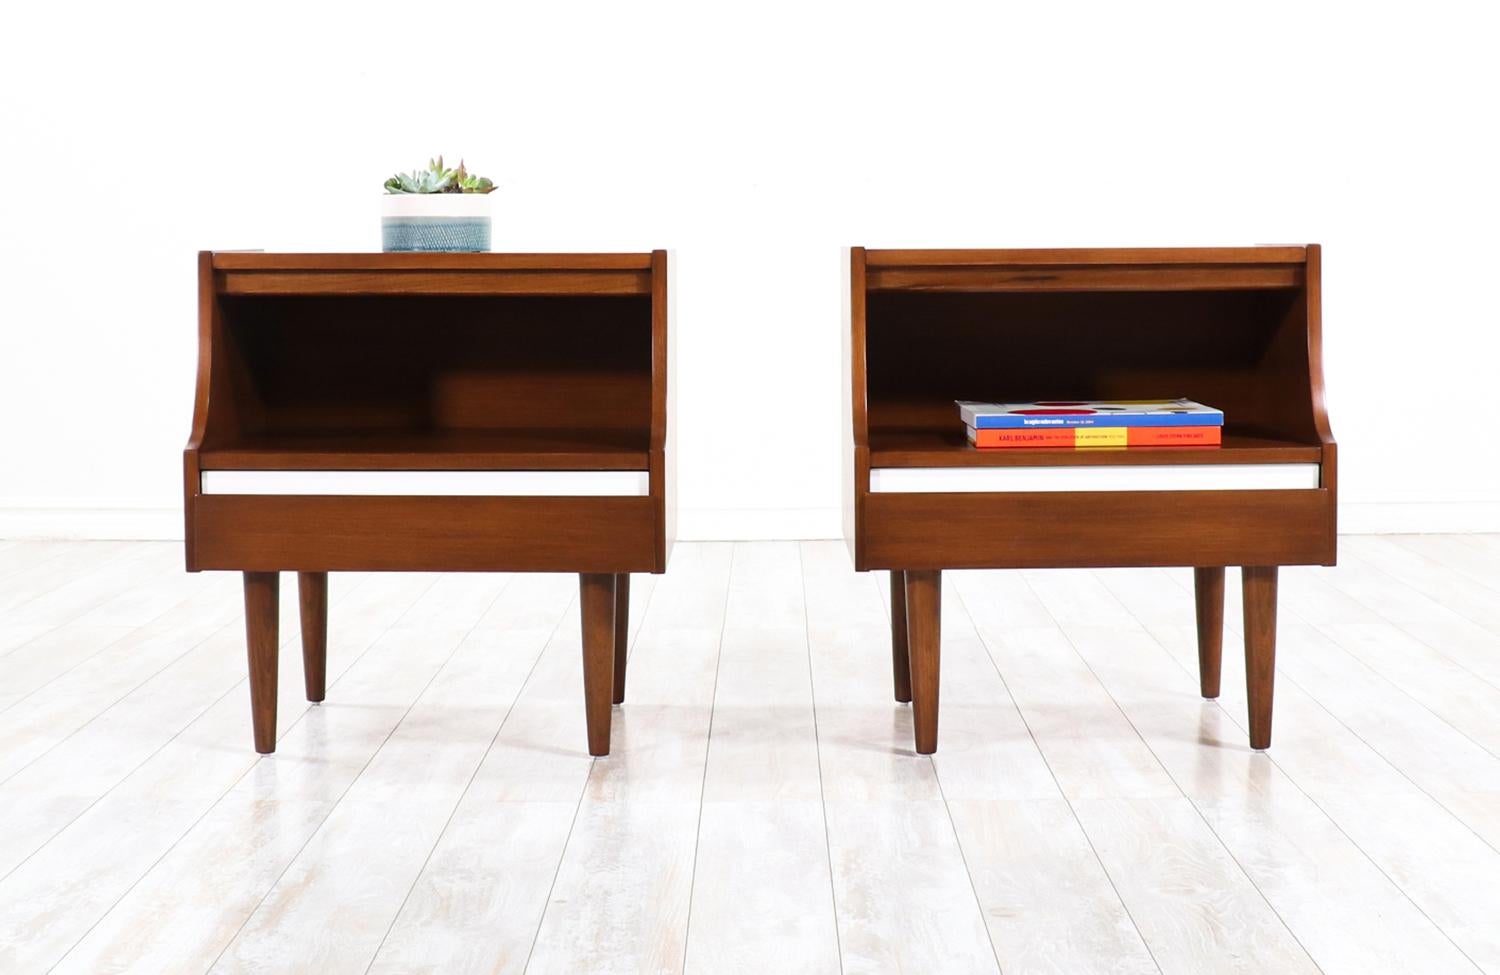 Mid-Century Modern nightstands by American of Martinsville.

________________________________________

Transforming a piece of Mid-Century Modern furniture is like bringing history back to life, and we take this journey with passion and precision.